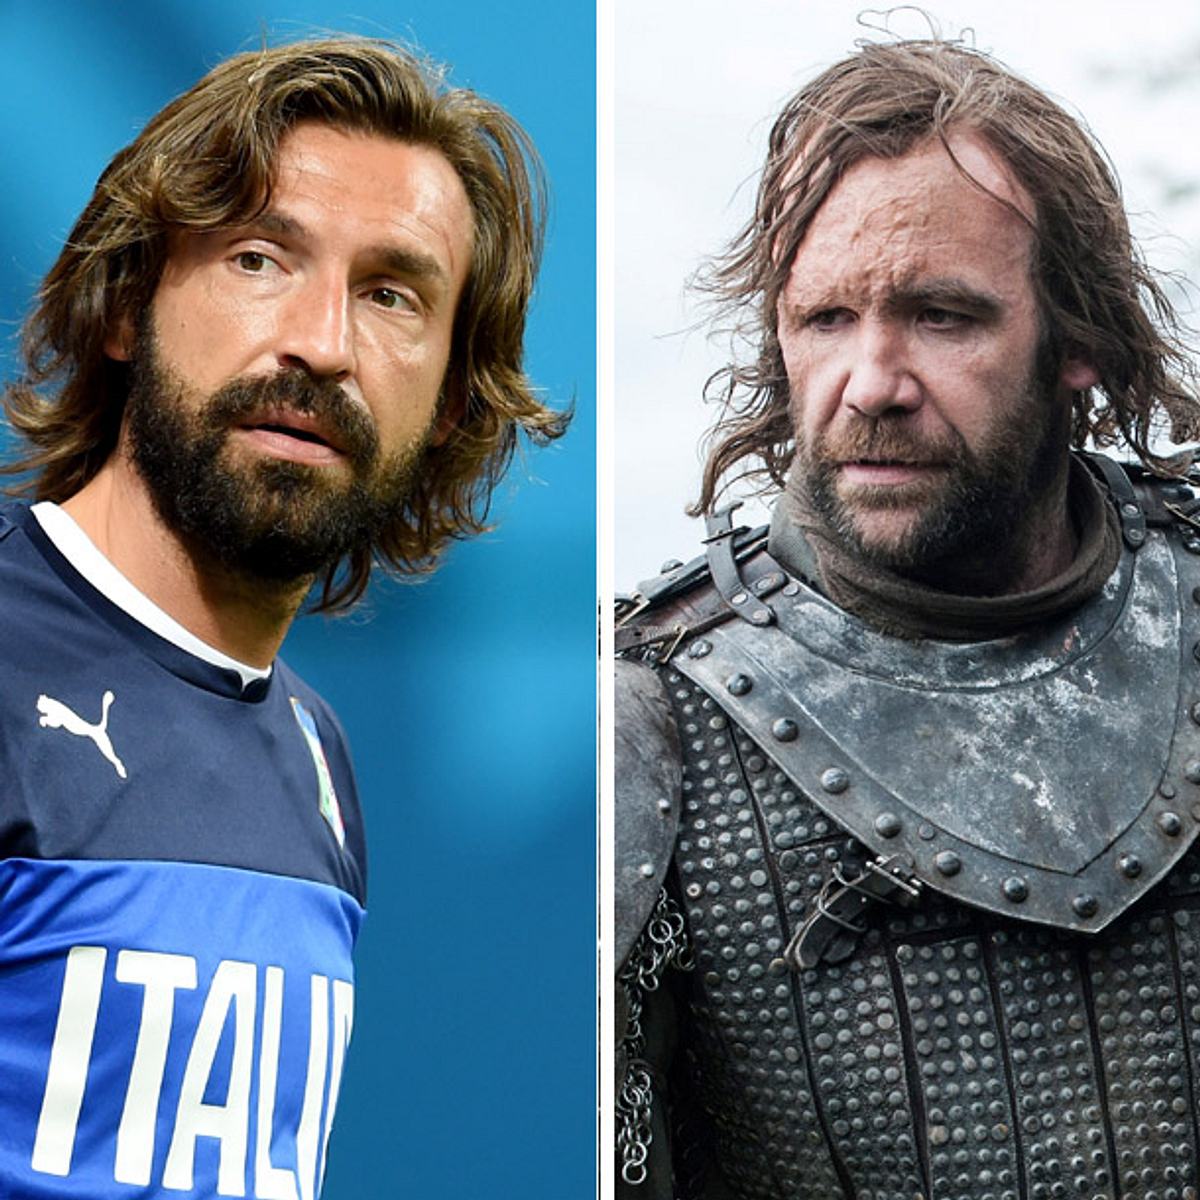 pirlo_-_the_hound_game_of_thrones_-_credit_action_press